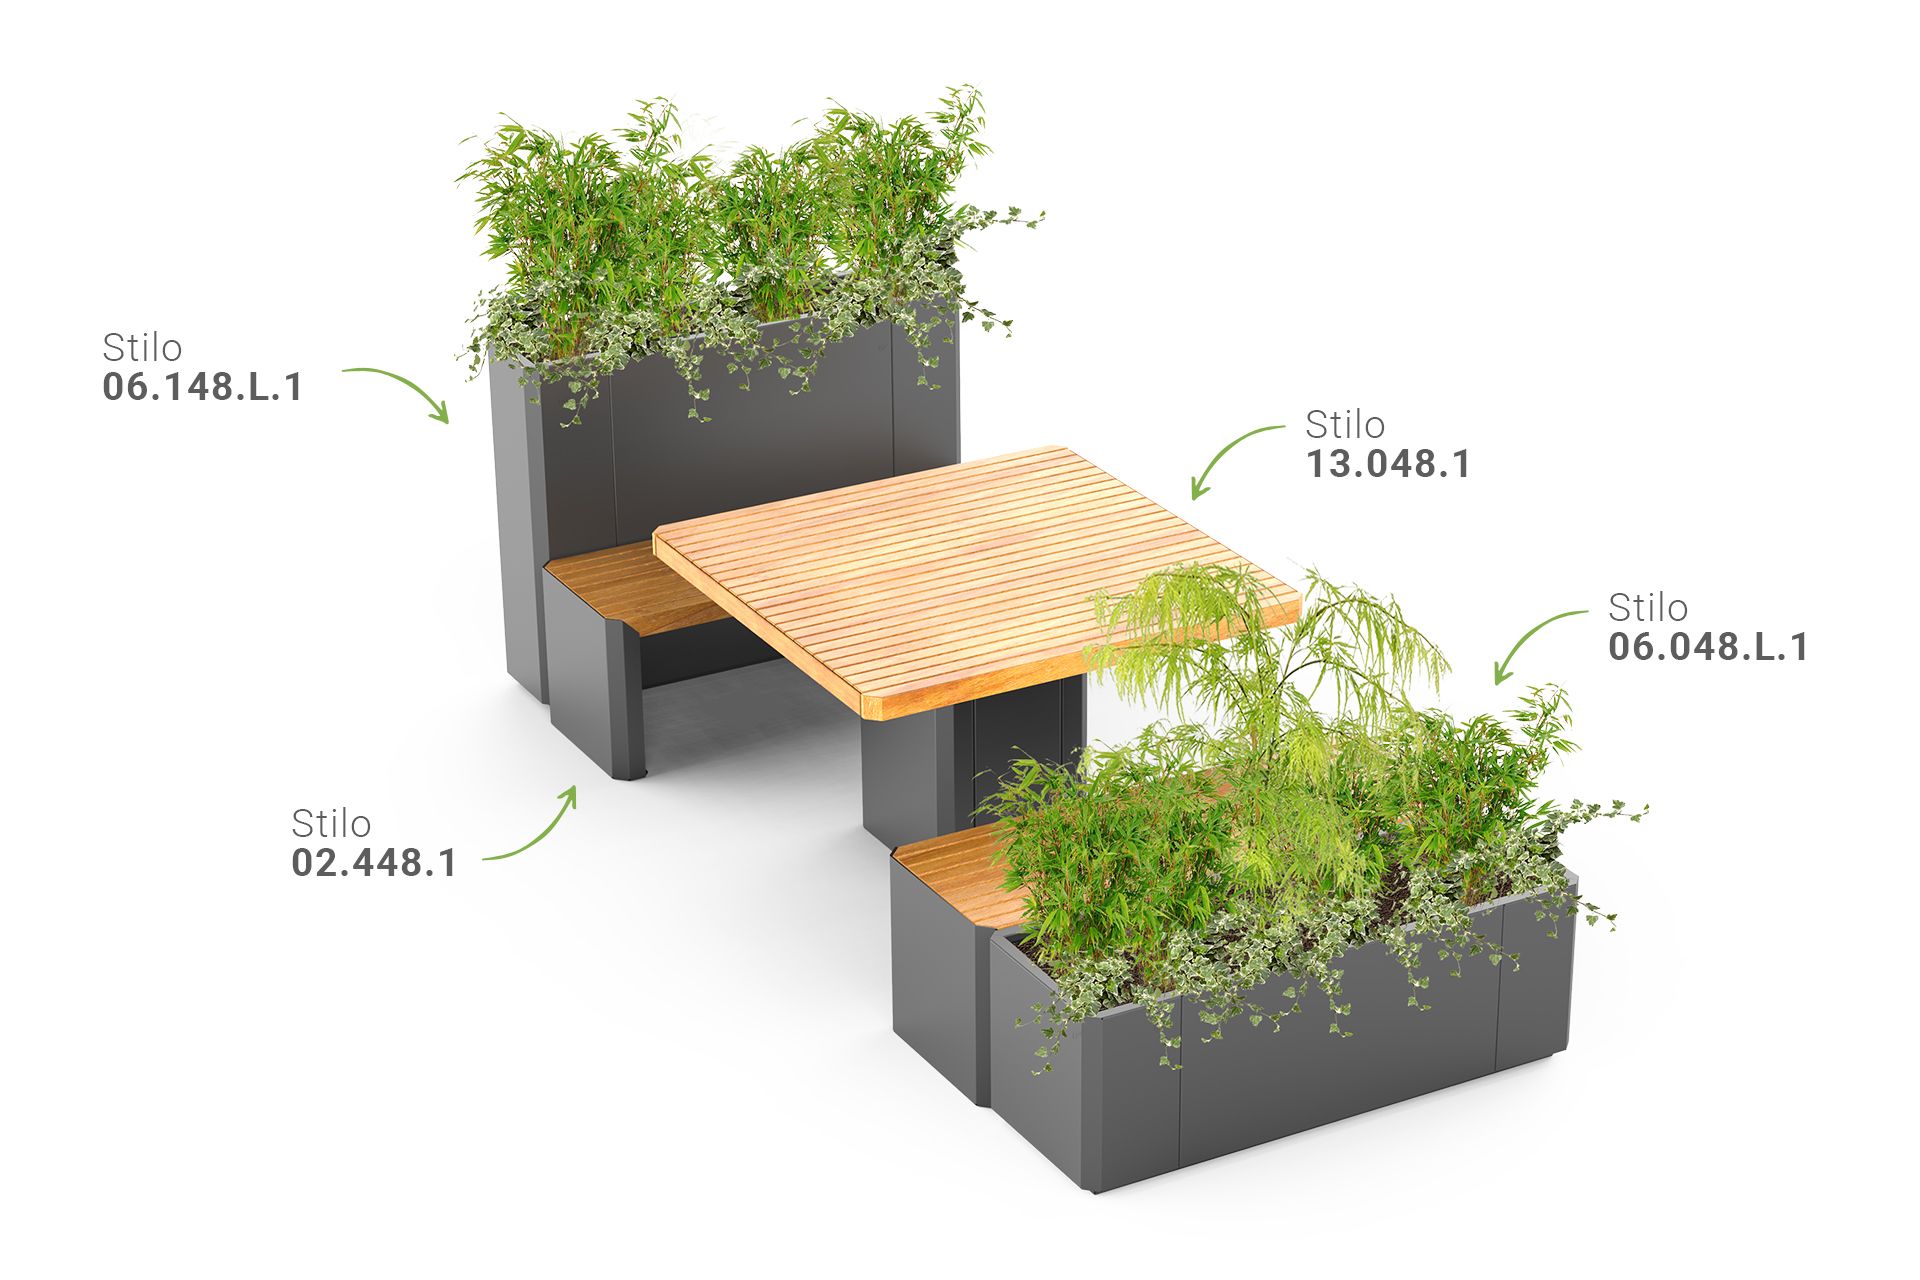 Urban benches, tables and planters in steel and hardwood